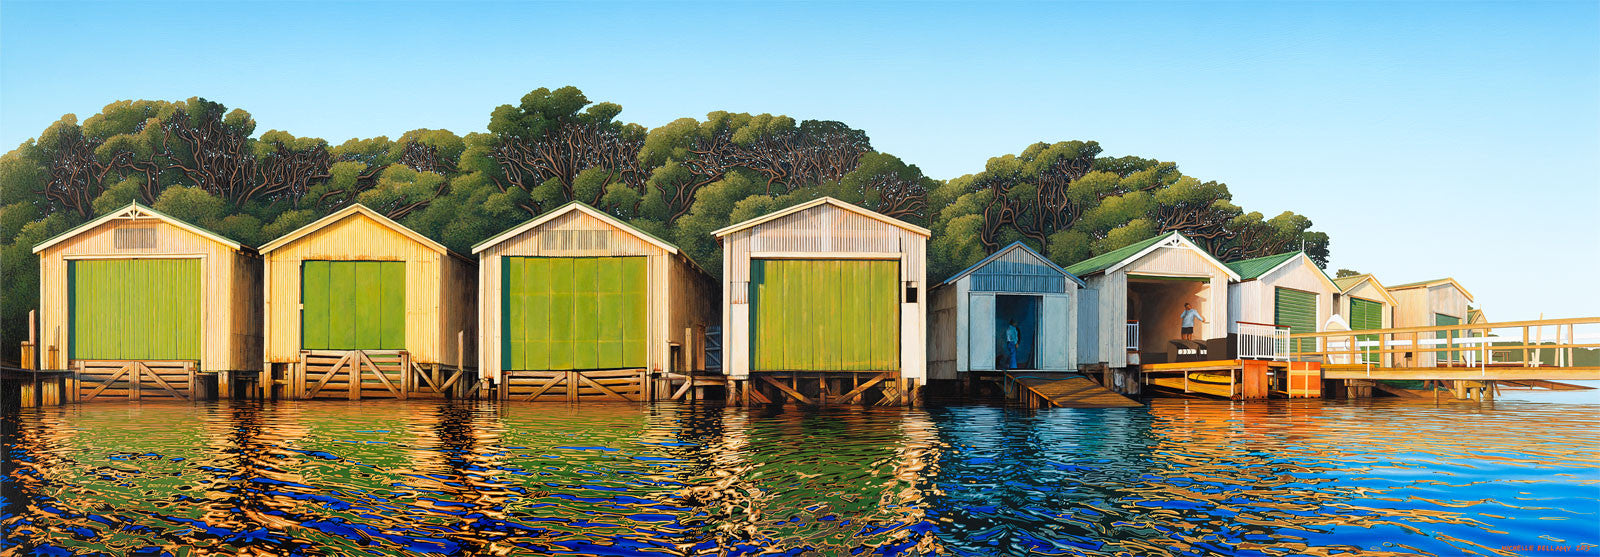 A painting of the Orakei Boat Sheds on Ngapipi Rd, by New Zealand artist Michelle Bellamy.